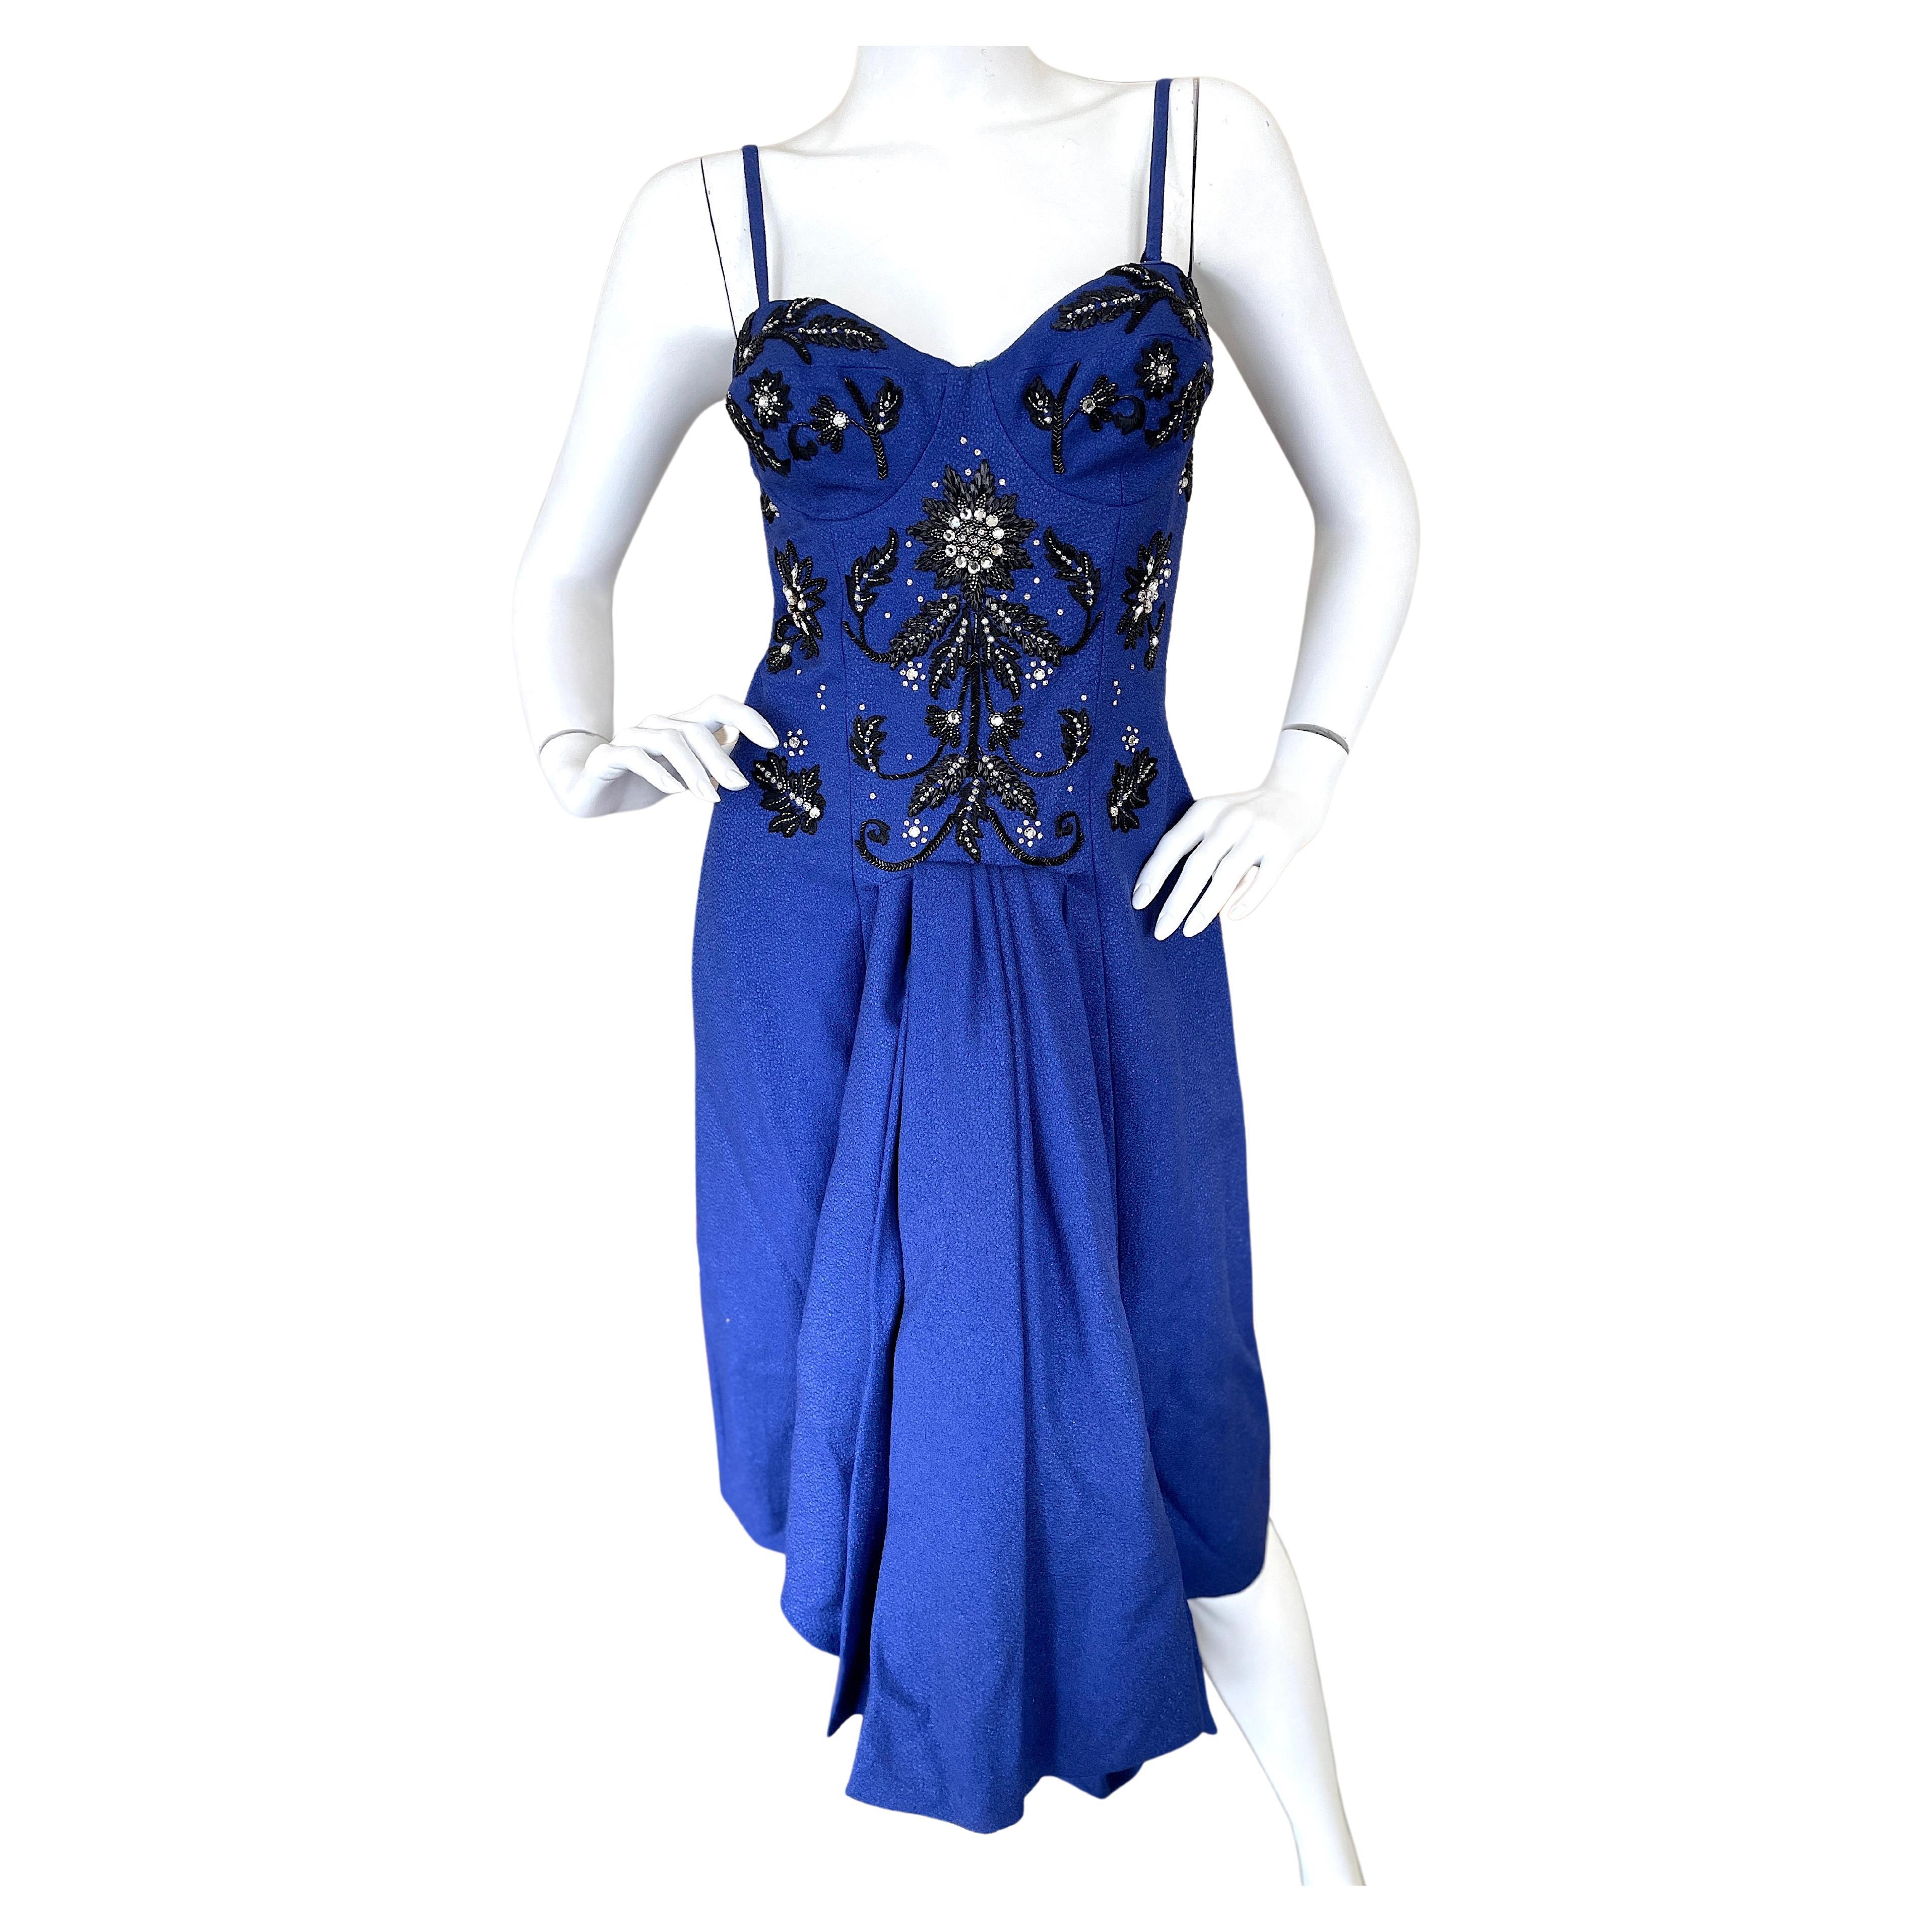 Christian Dior by John Galliano Fall 2007 Blue Dress with Crystal Details For Sale